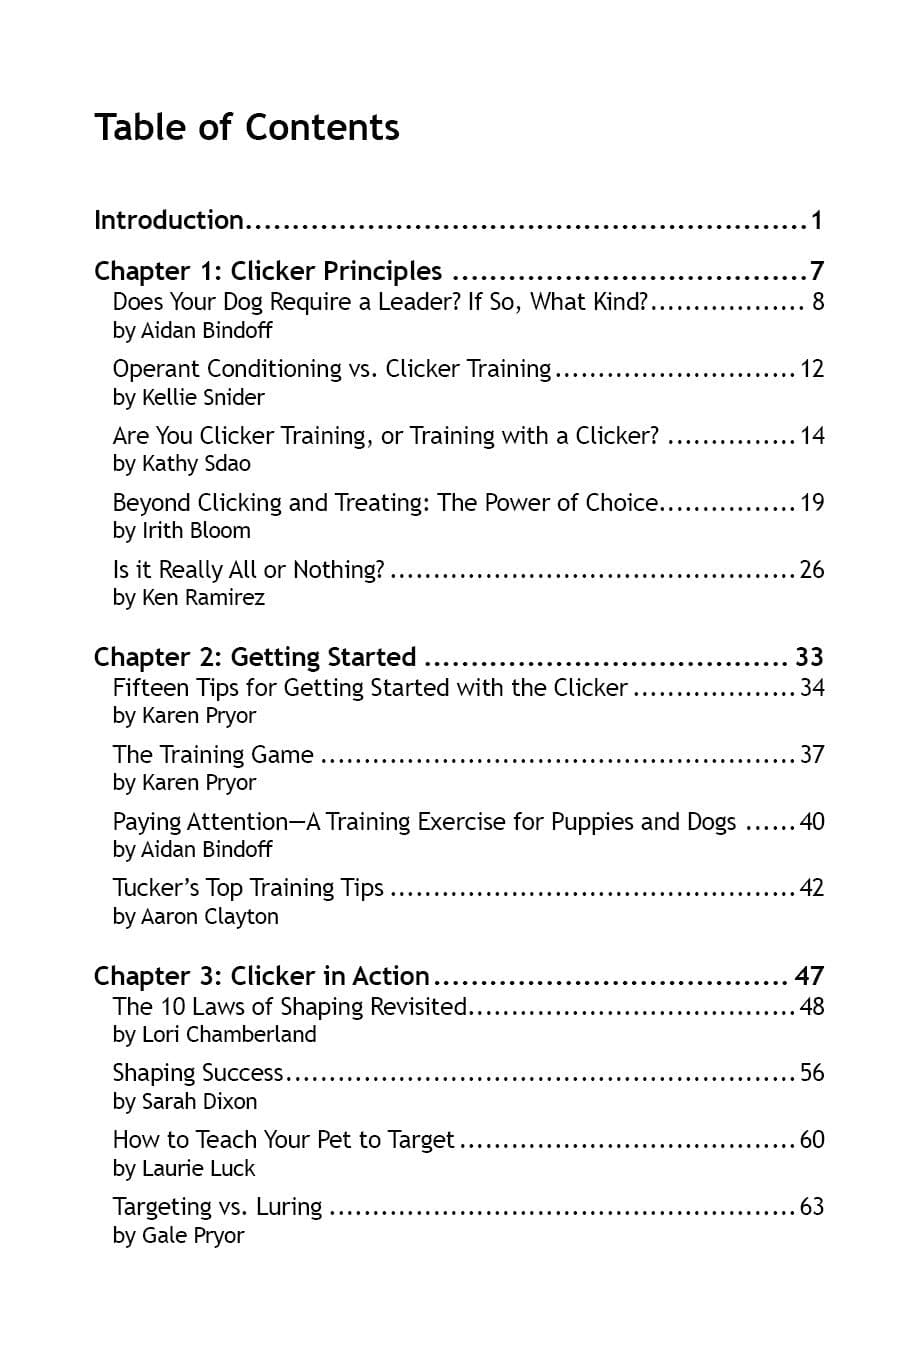 Better Together: The Collected Wisdom of Modern Dog Trainers Edited by Ken Ramirez